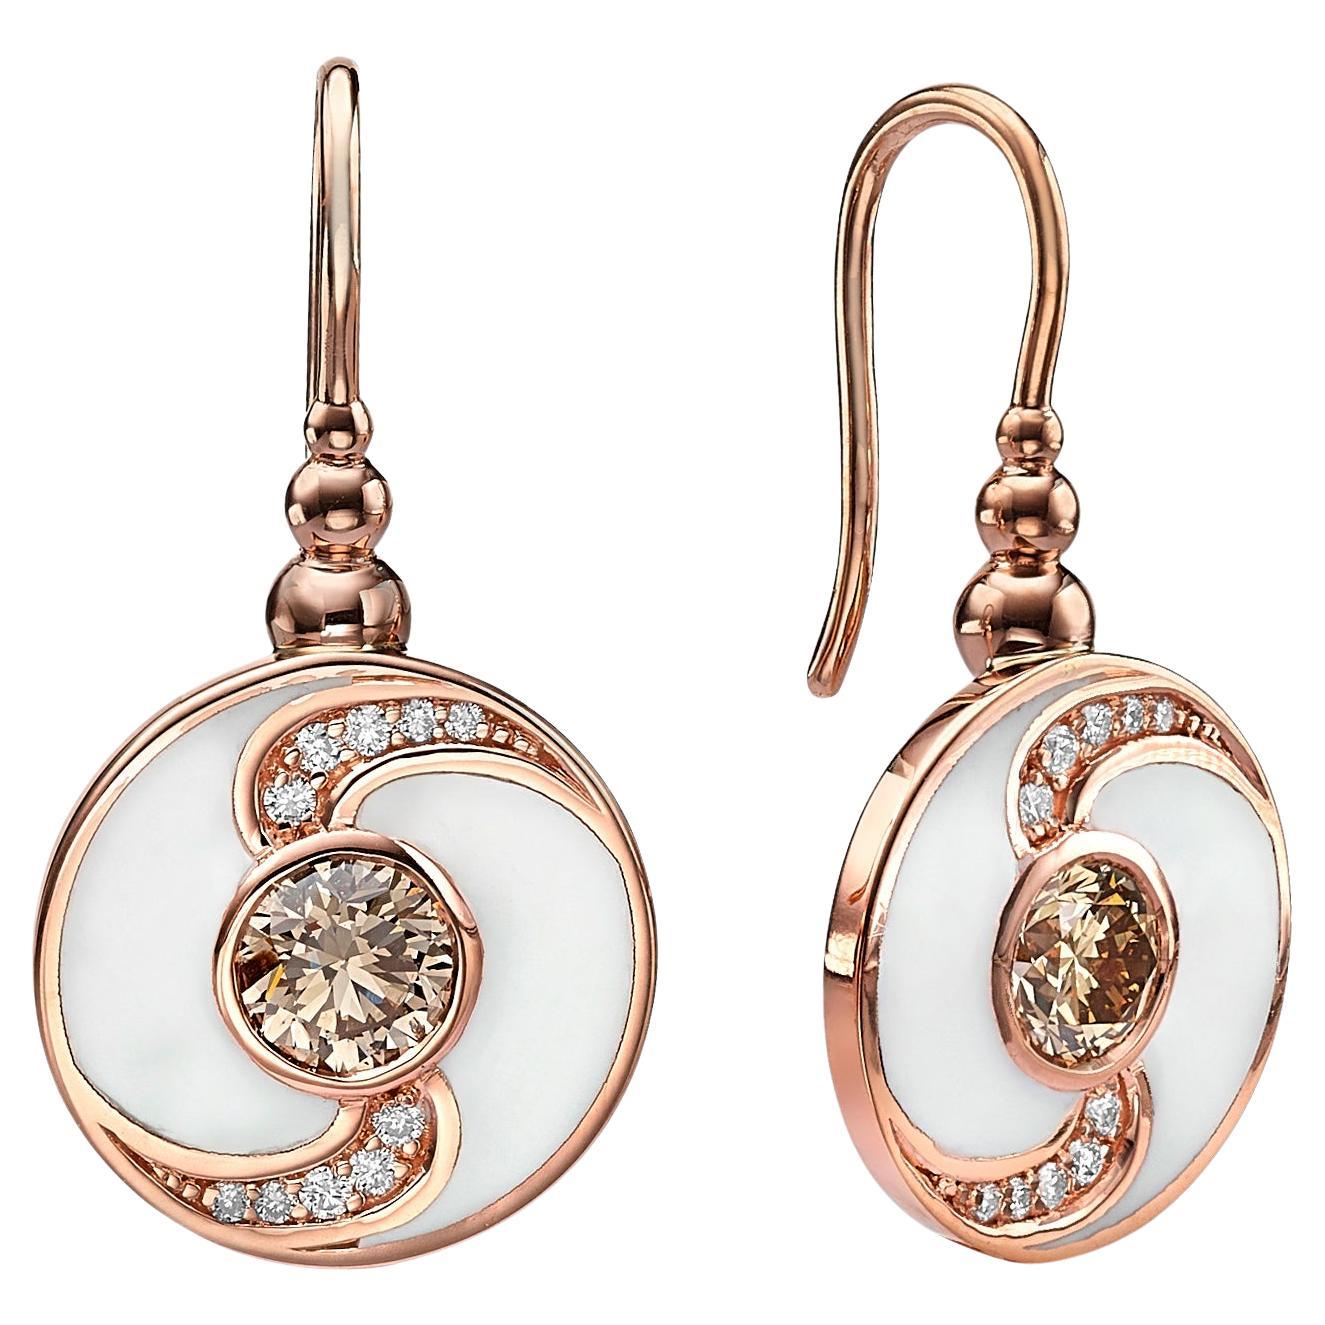 Venice Collection: Round Shaped White Enamel Diamond Earrings in 18k Rose Gold For Sale